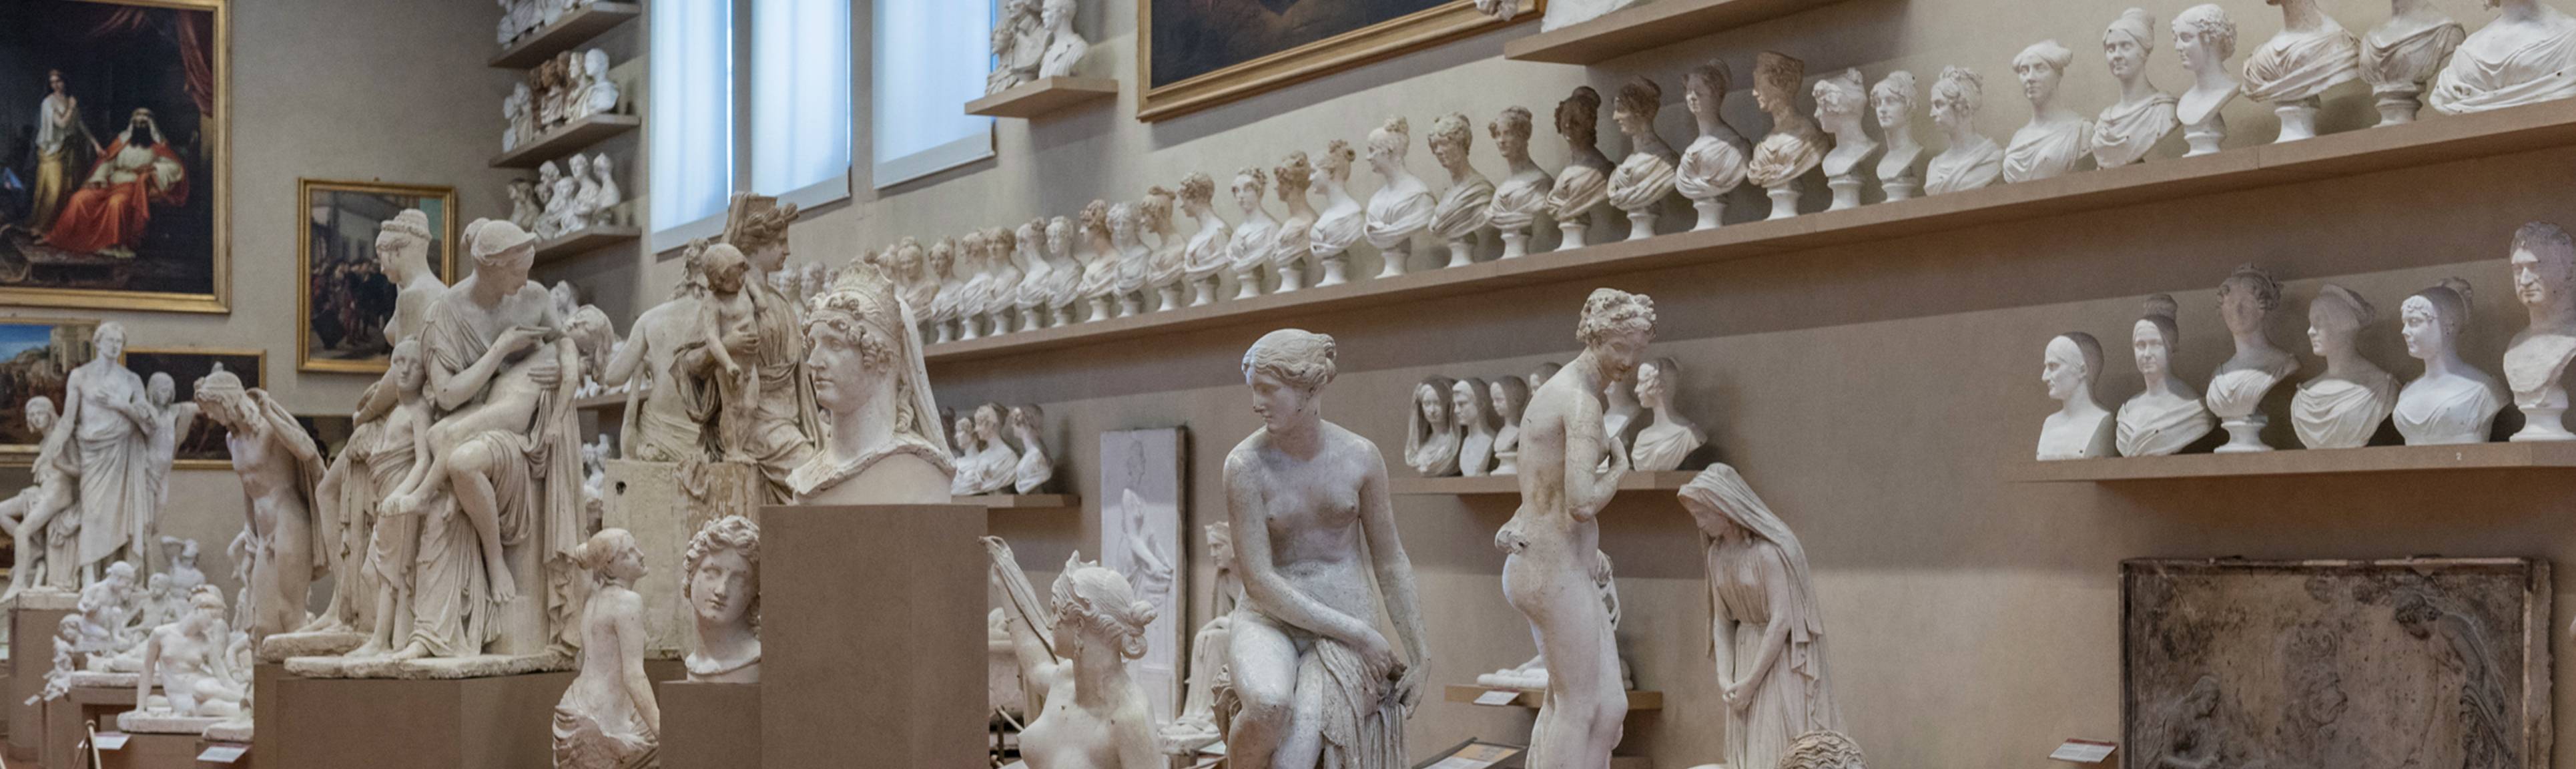 Room full of plaster statues and busts at Galleria dell'Accademia, Florence